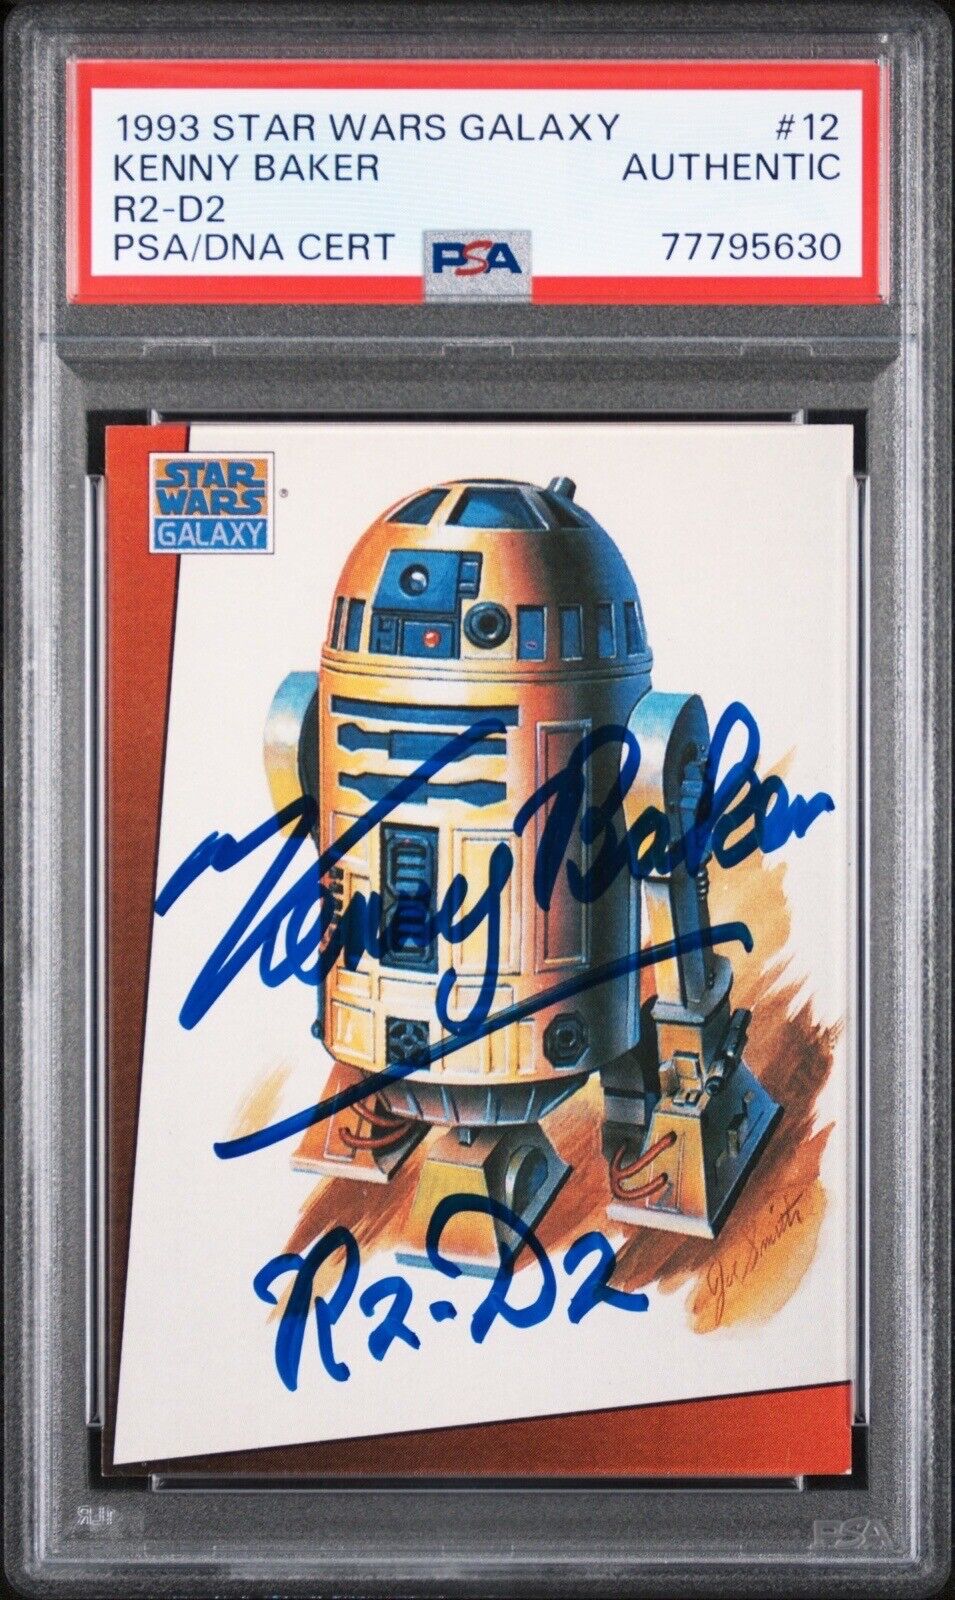 1993 Topps Star Wars Galaxy R2-D2 KENNY BAKER AUTO PSA Authenticated #12